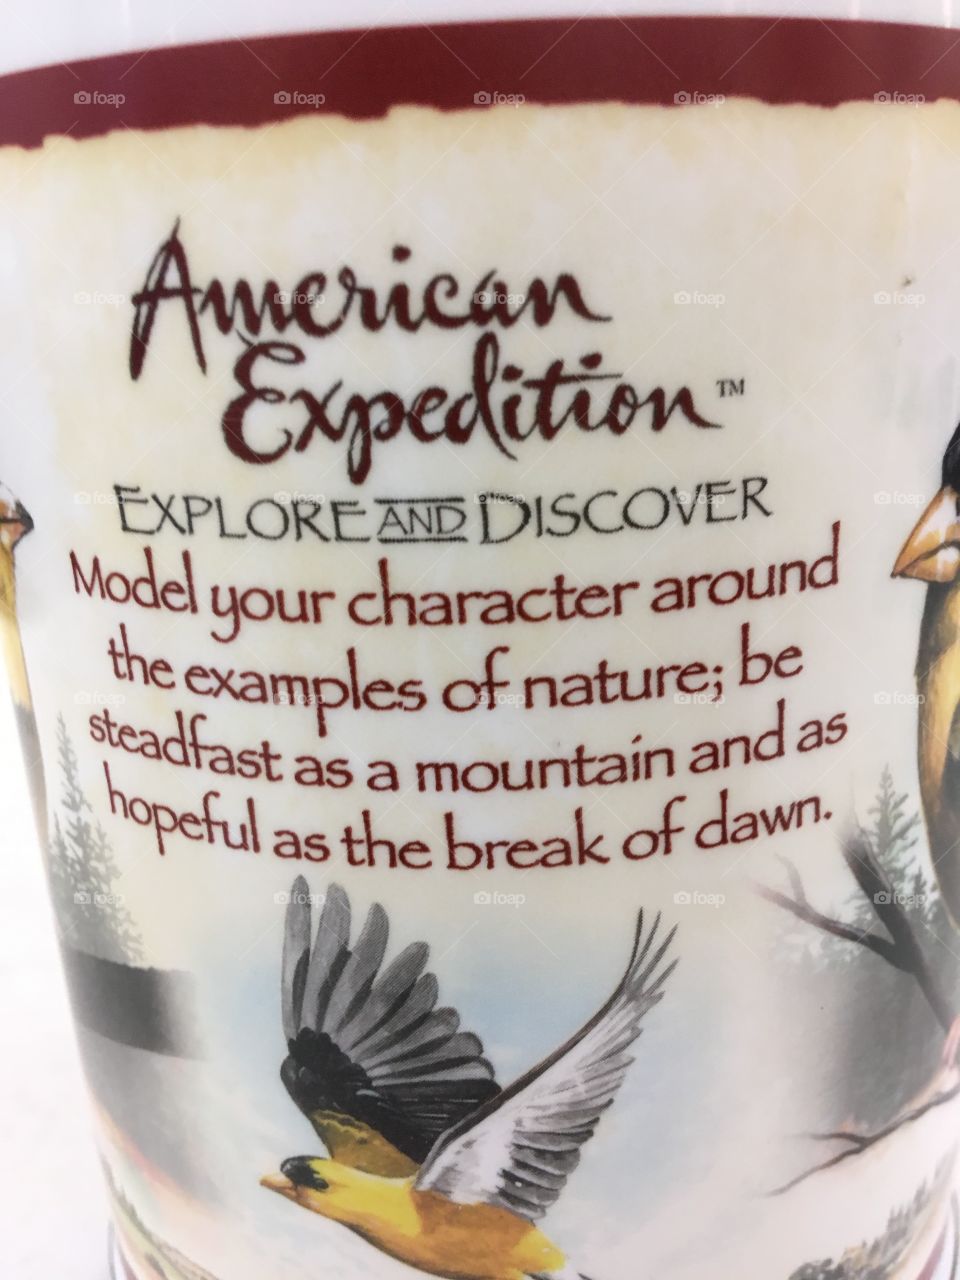 Here’s your quote for the day hope you enjoy straight from the Goldfinch on this mug.